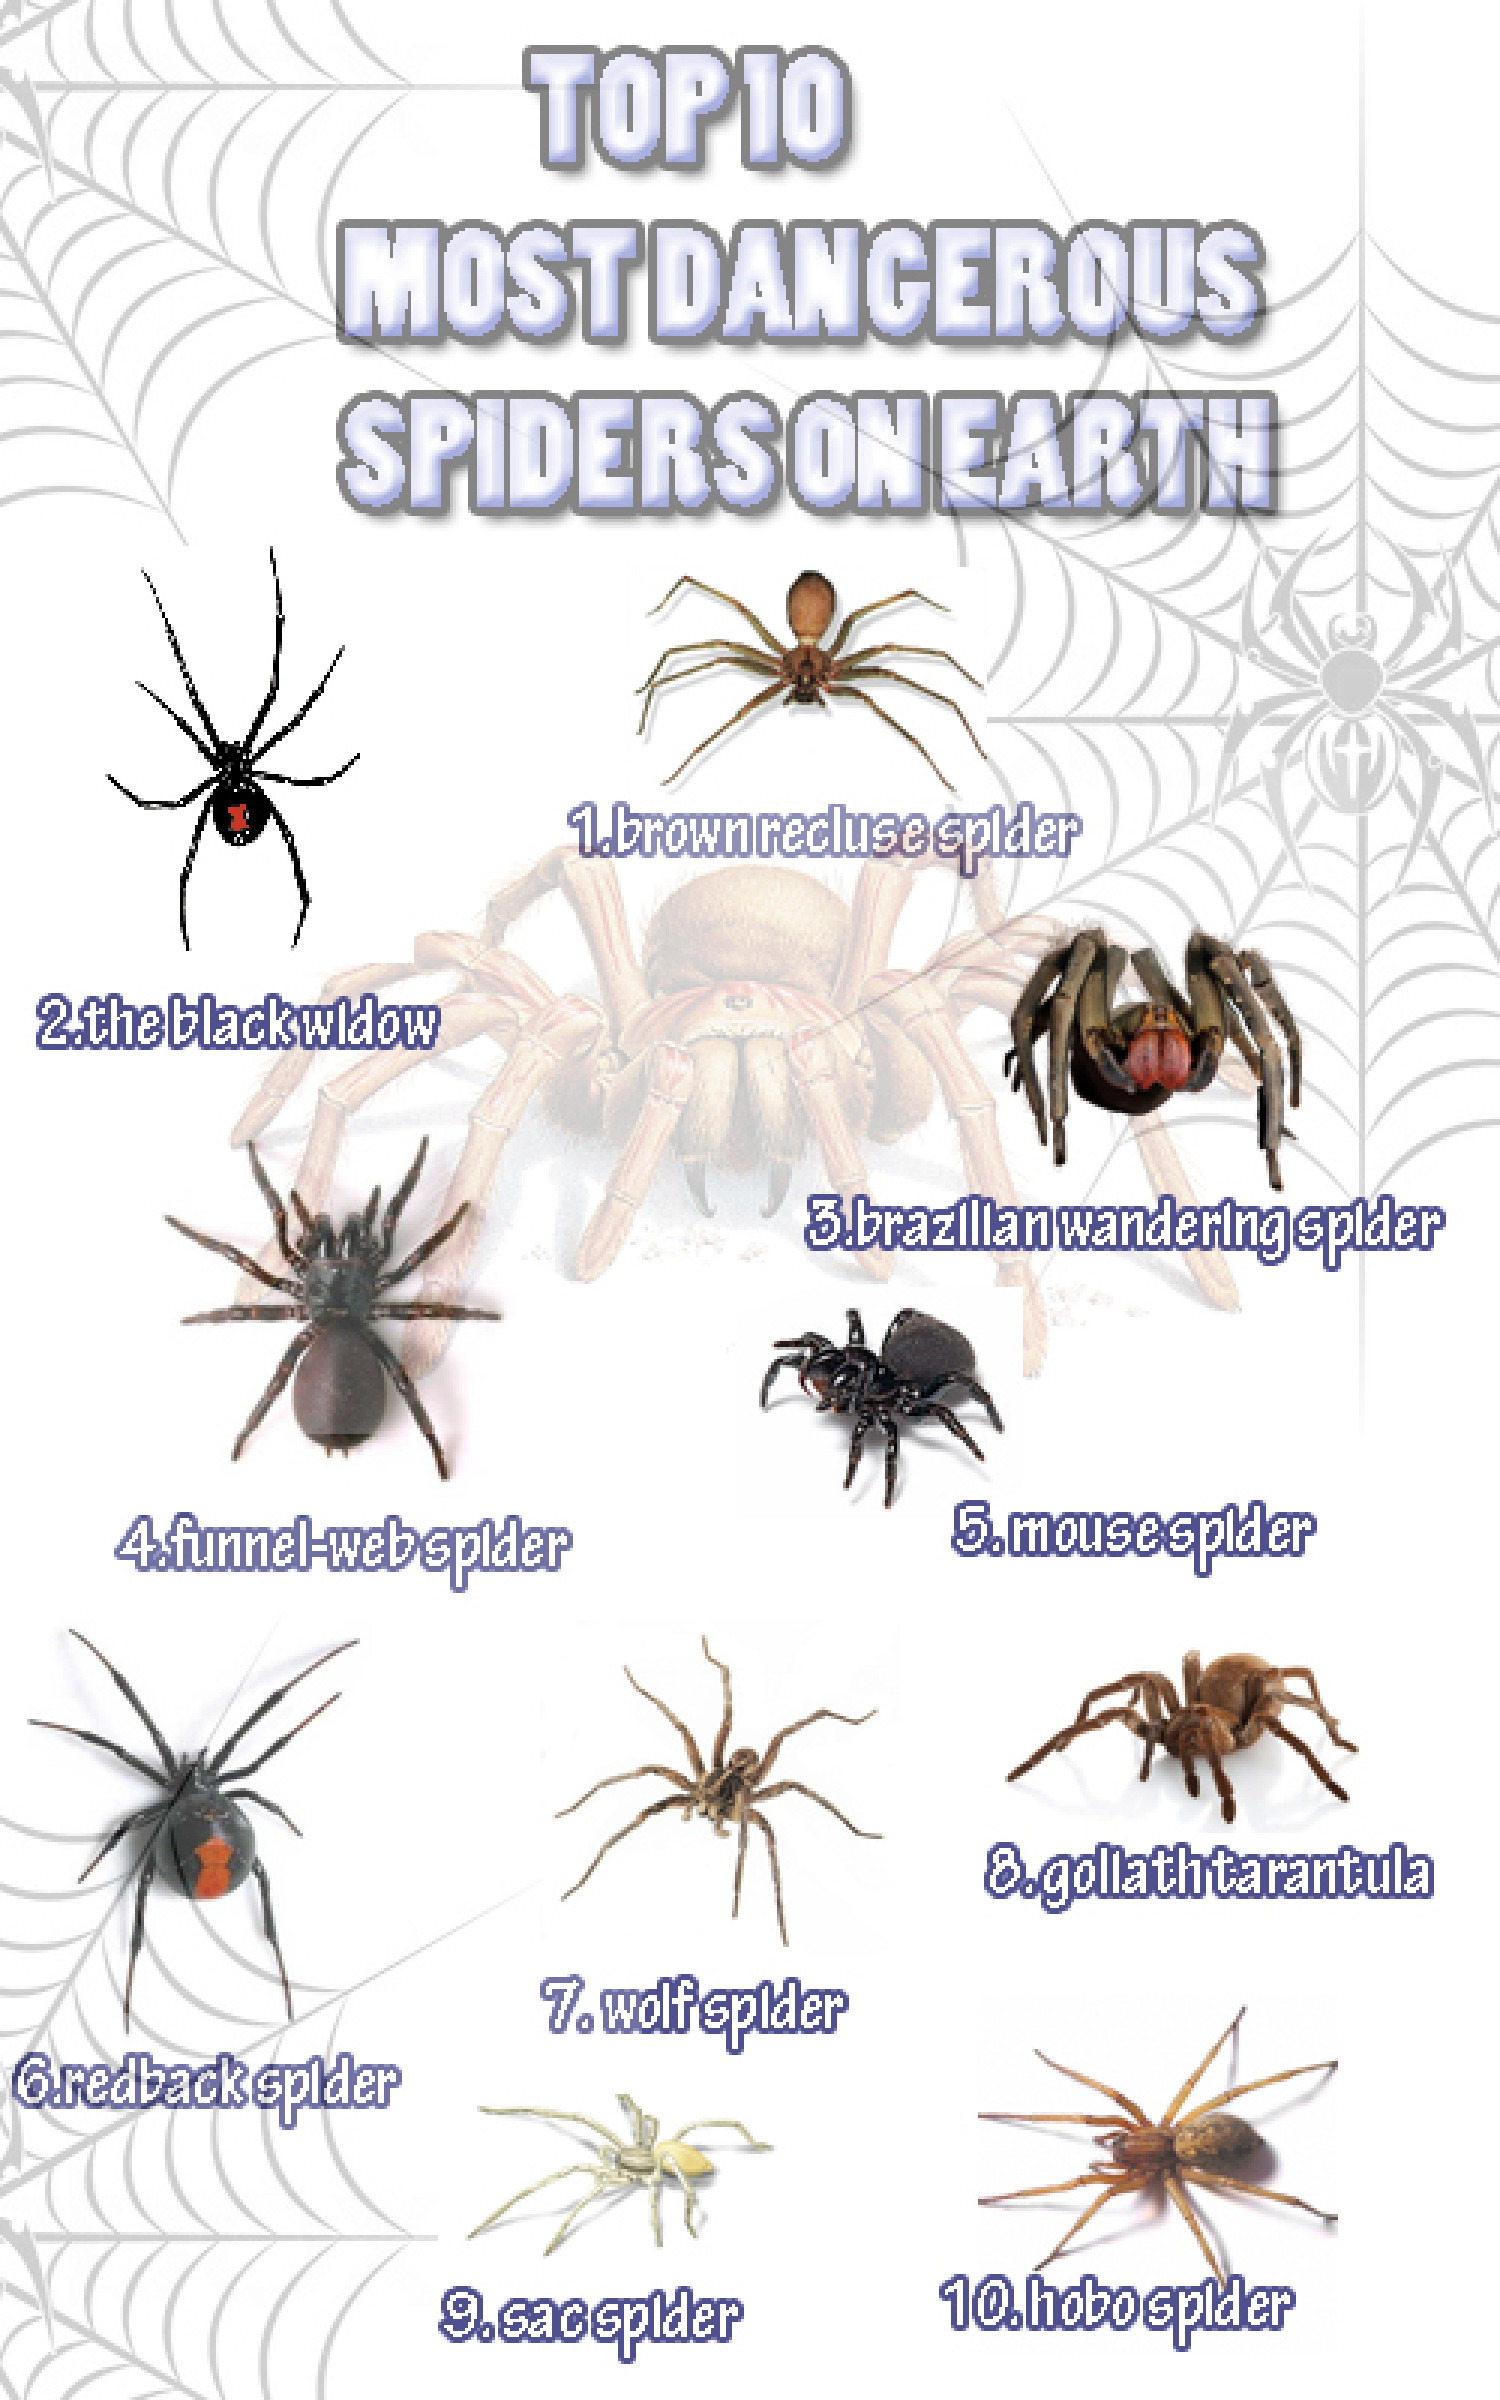 What are the top 10 poisonous spiders?